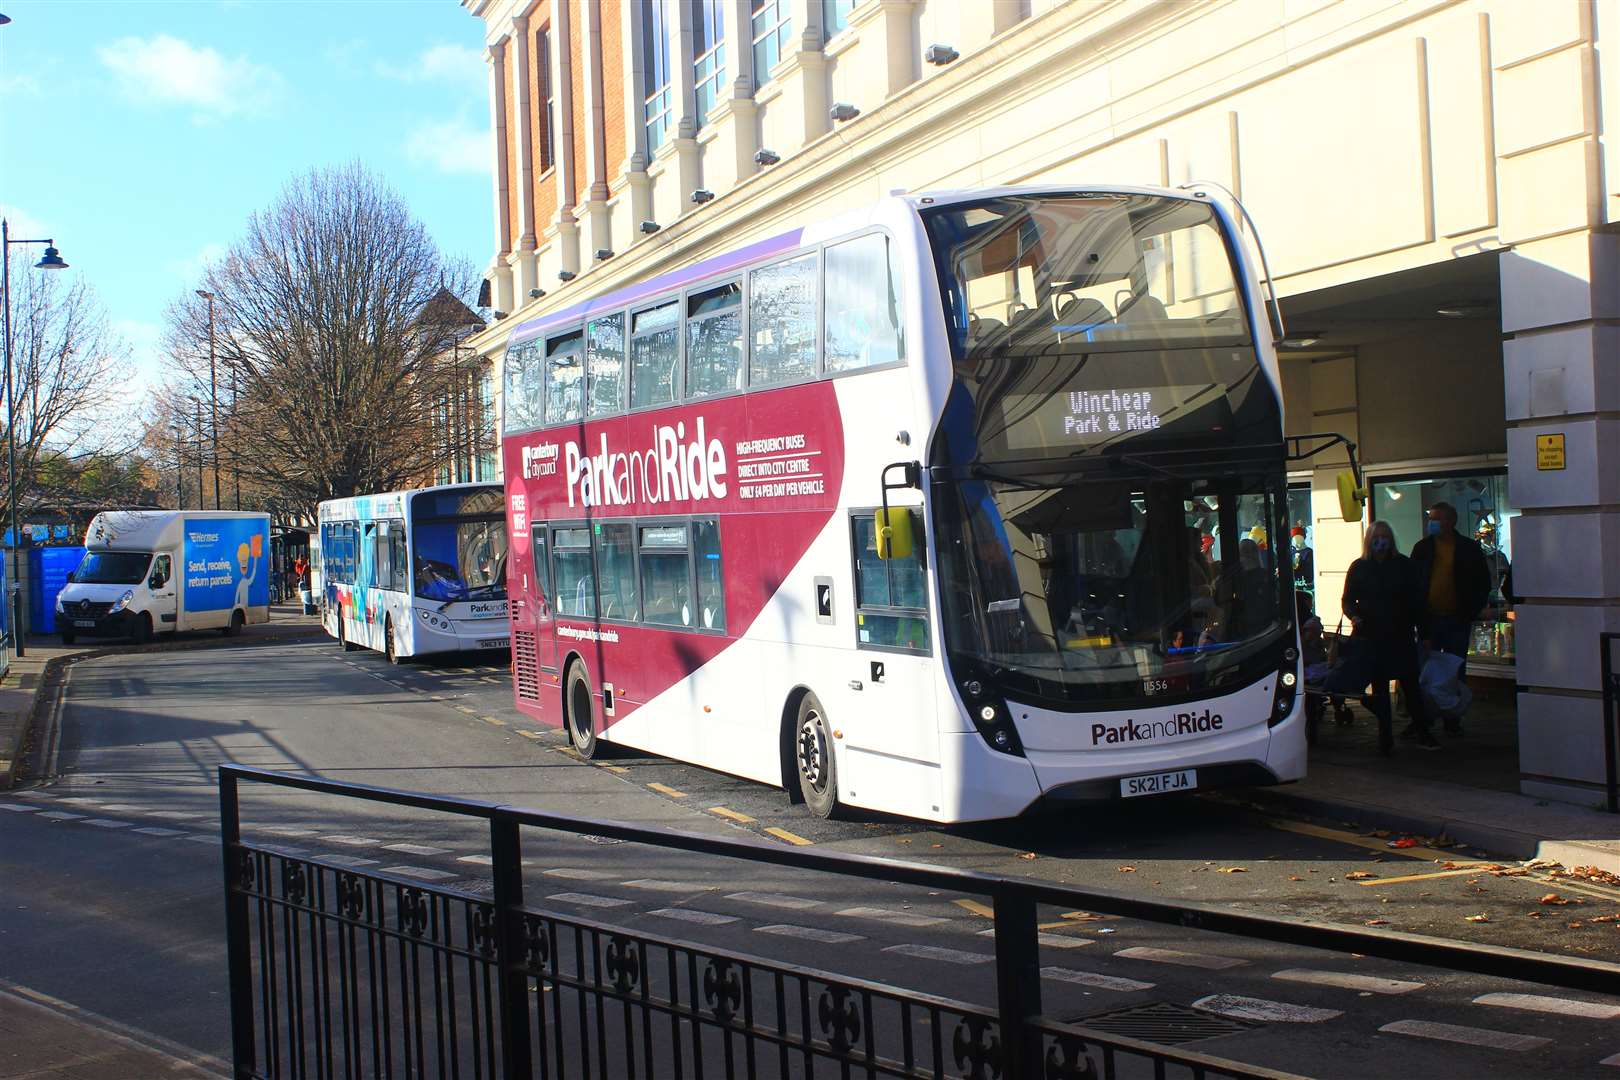 Park and ride services in Canterbury are running at a significant loss